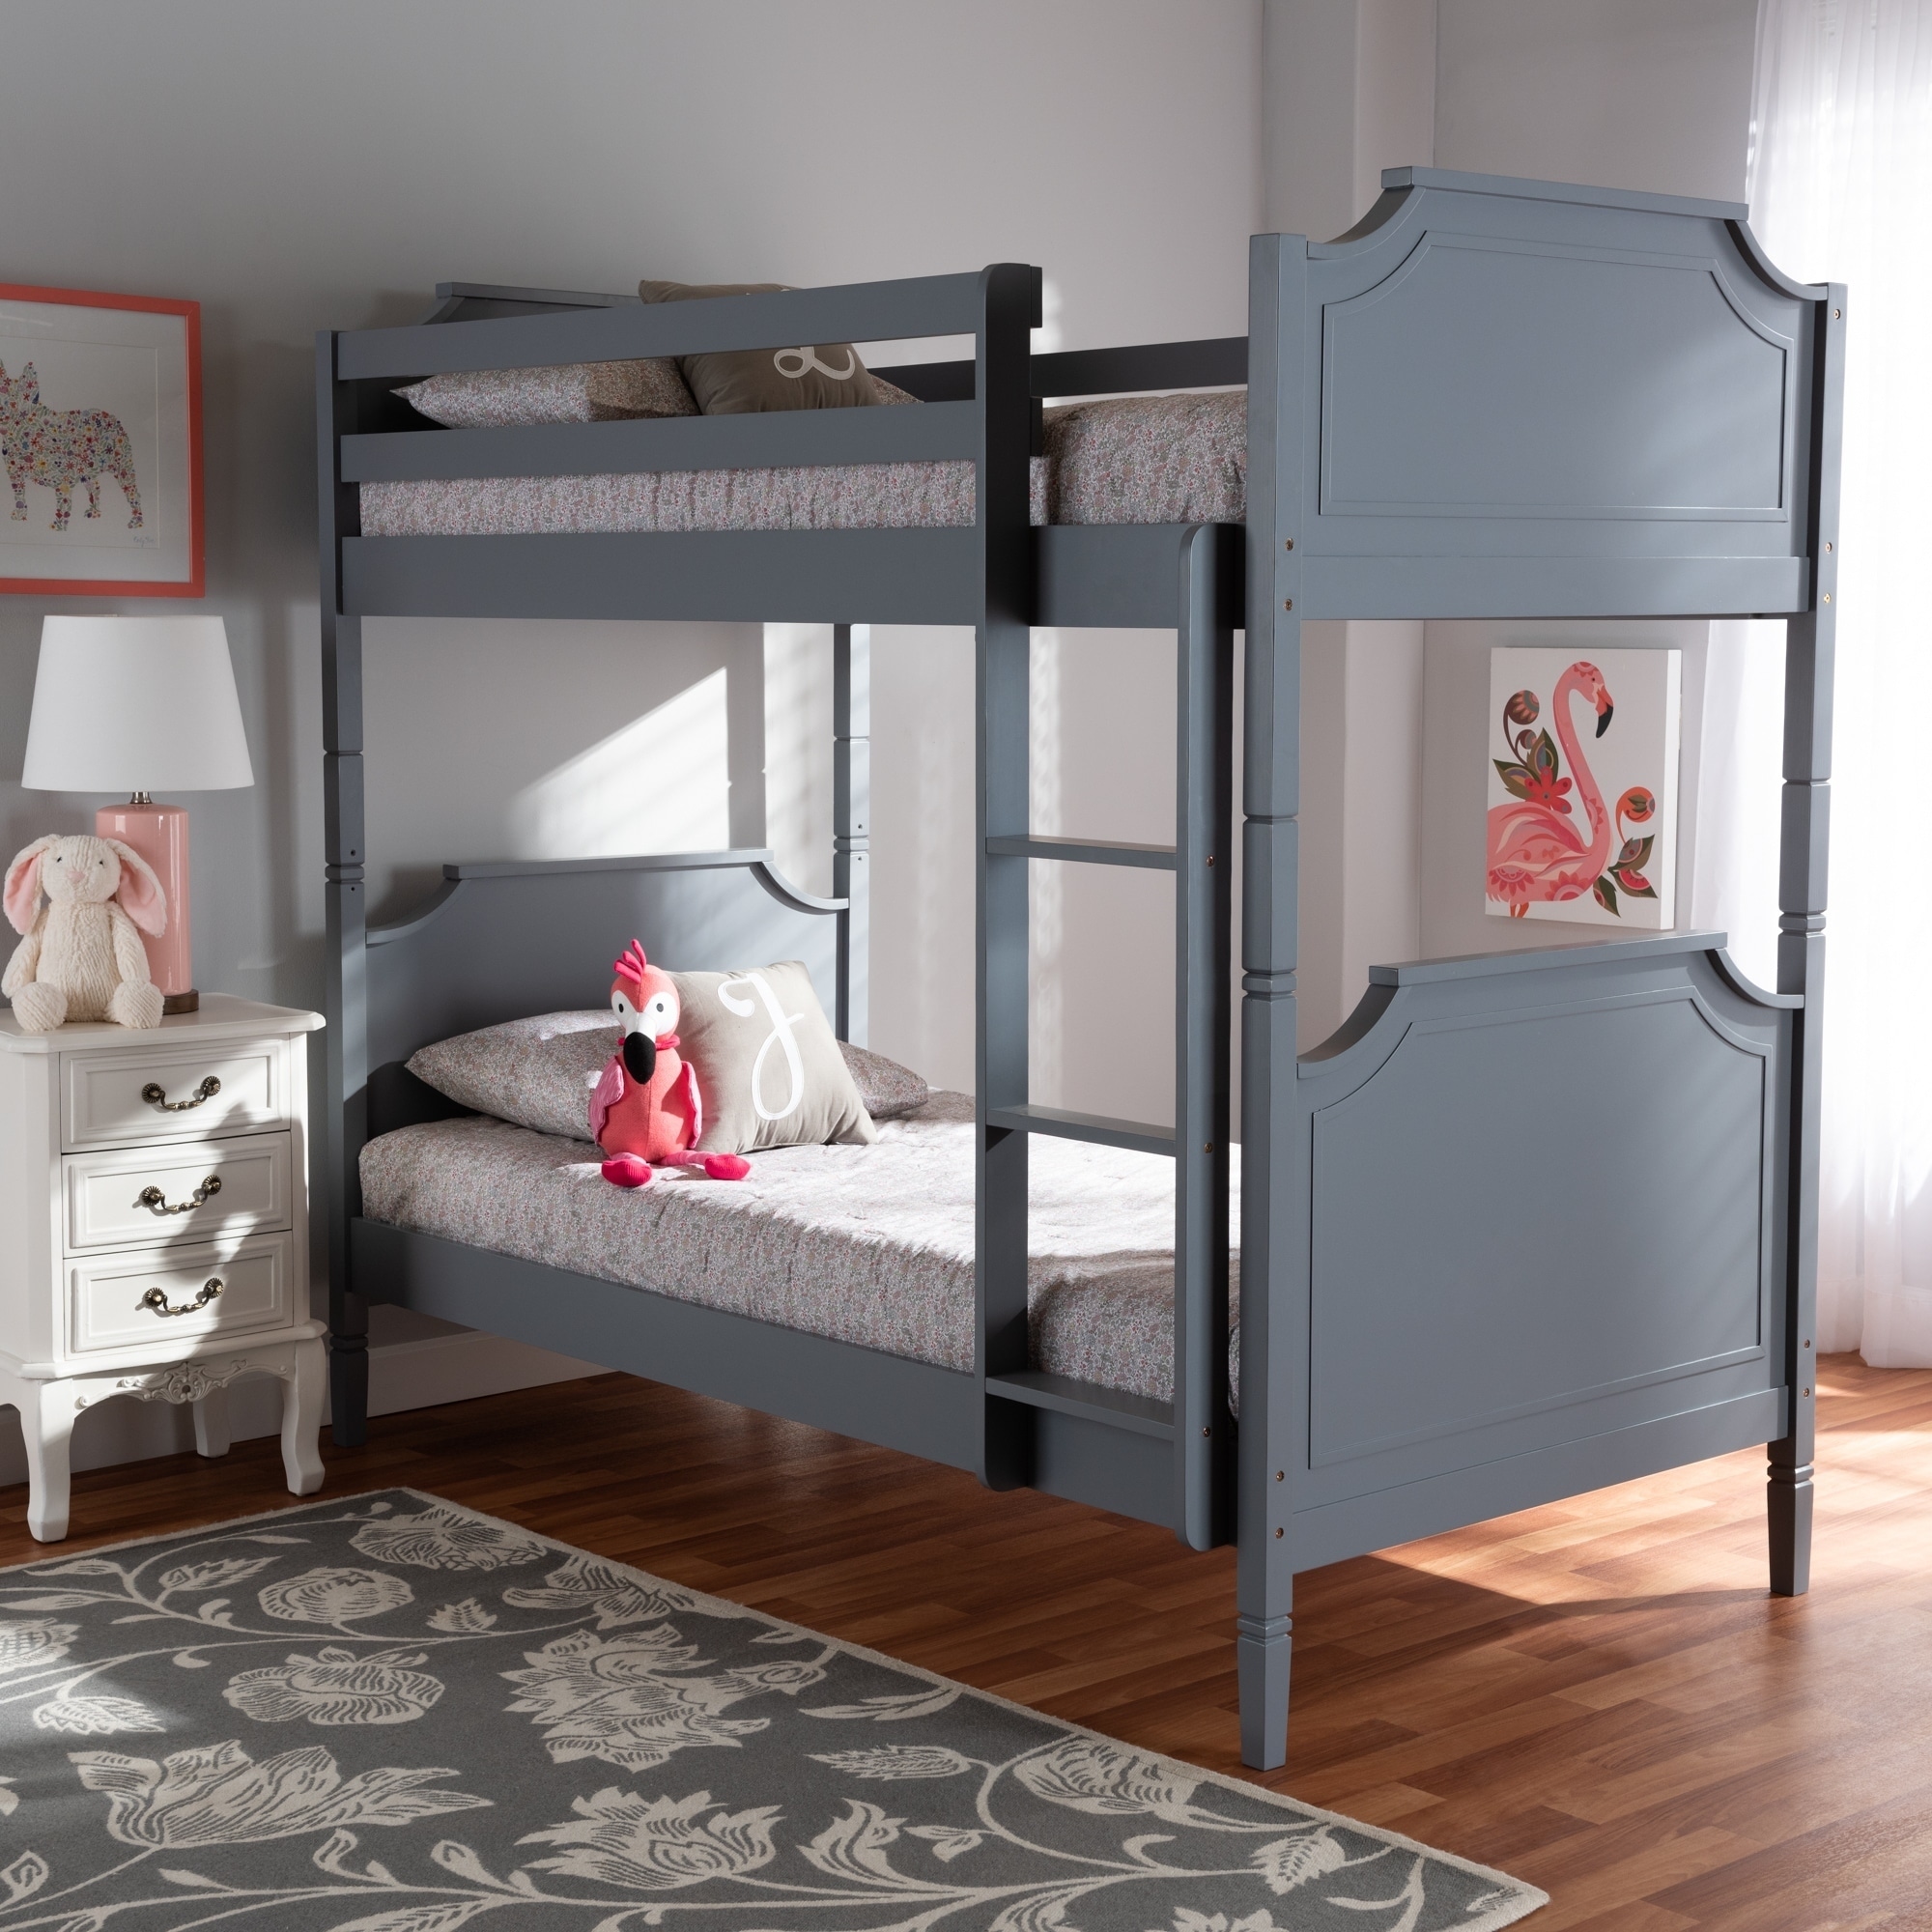 twin size bunk beds